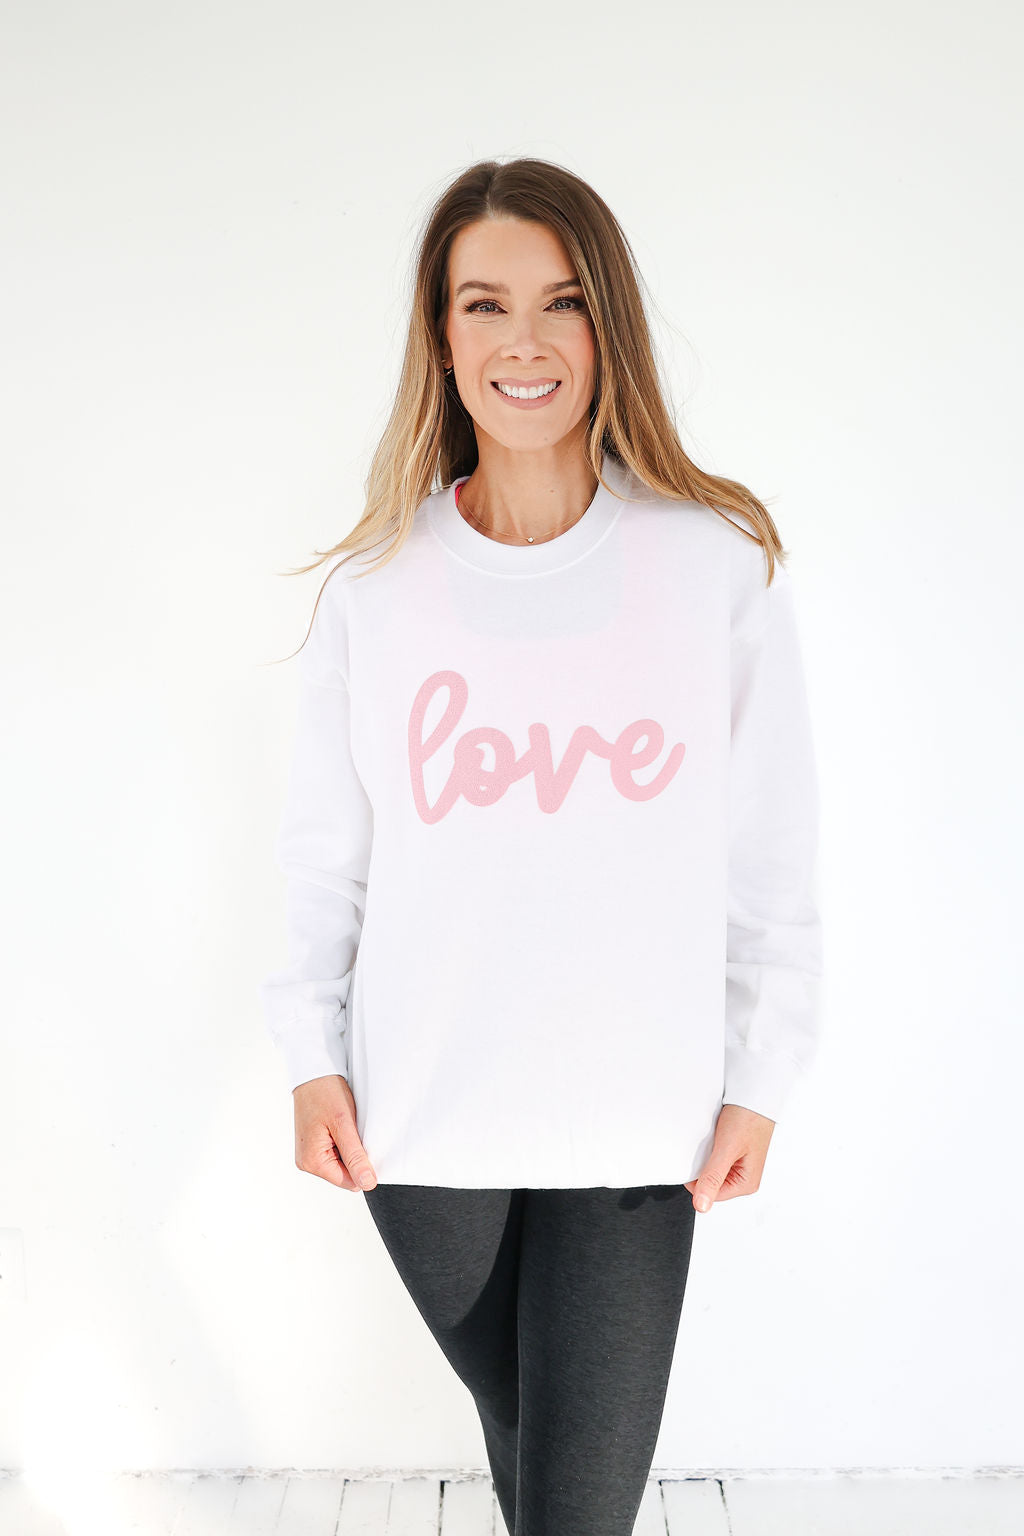 The perfect cozy sweatshirt for Valentine's Day or any day of the year, especially if you play tennis! We love a tennis related play on words.